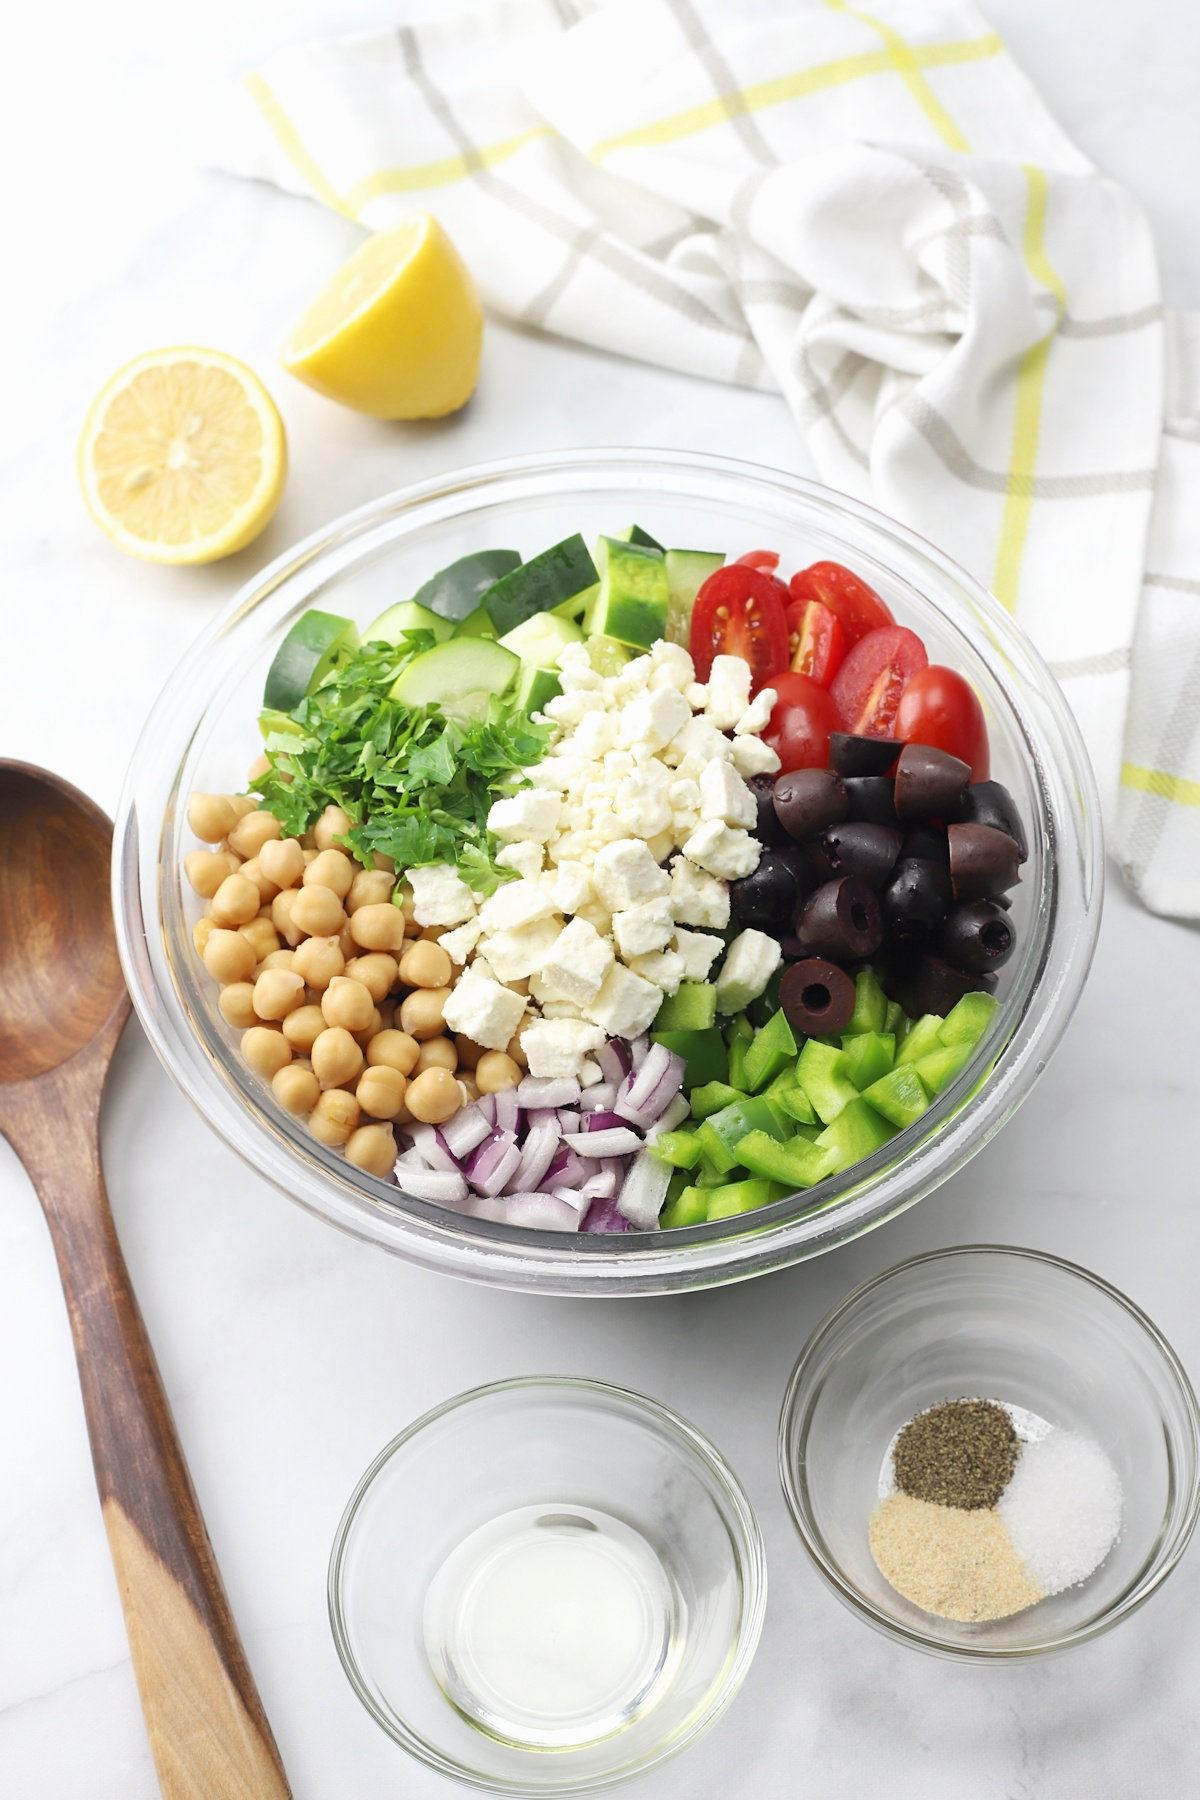 A bowl filled with ingredients for a salad.